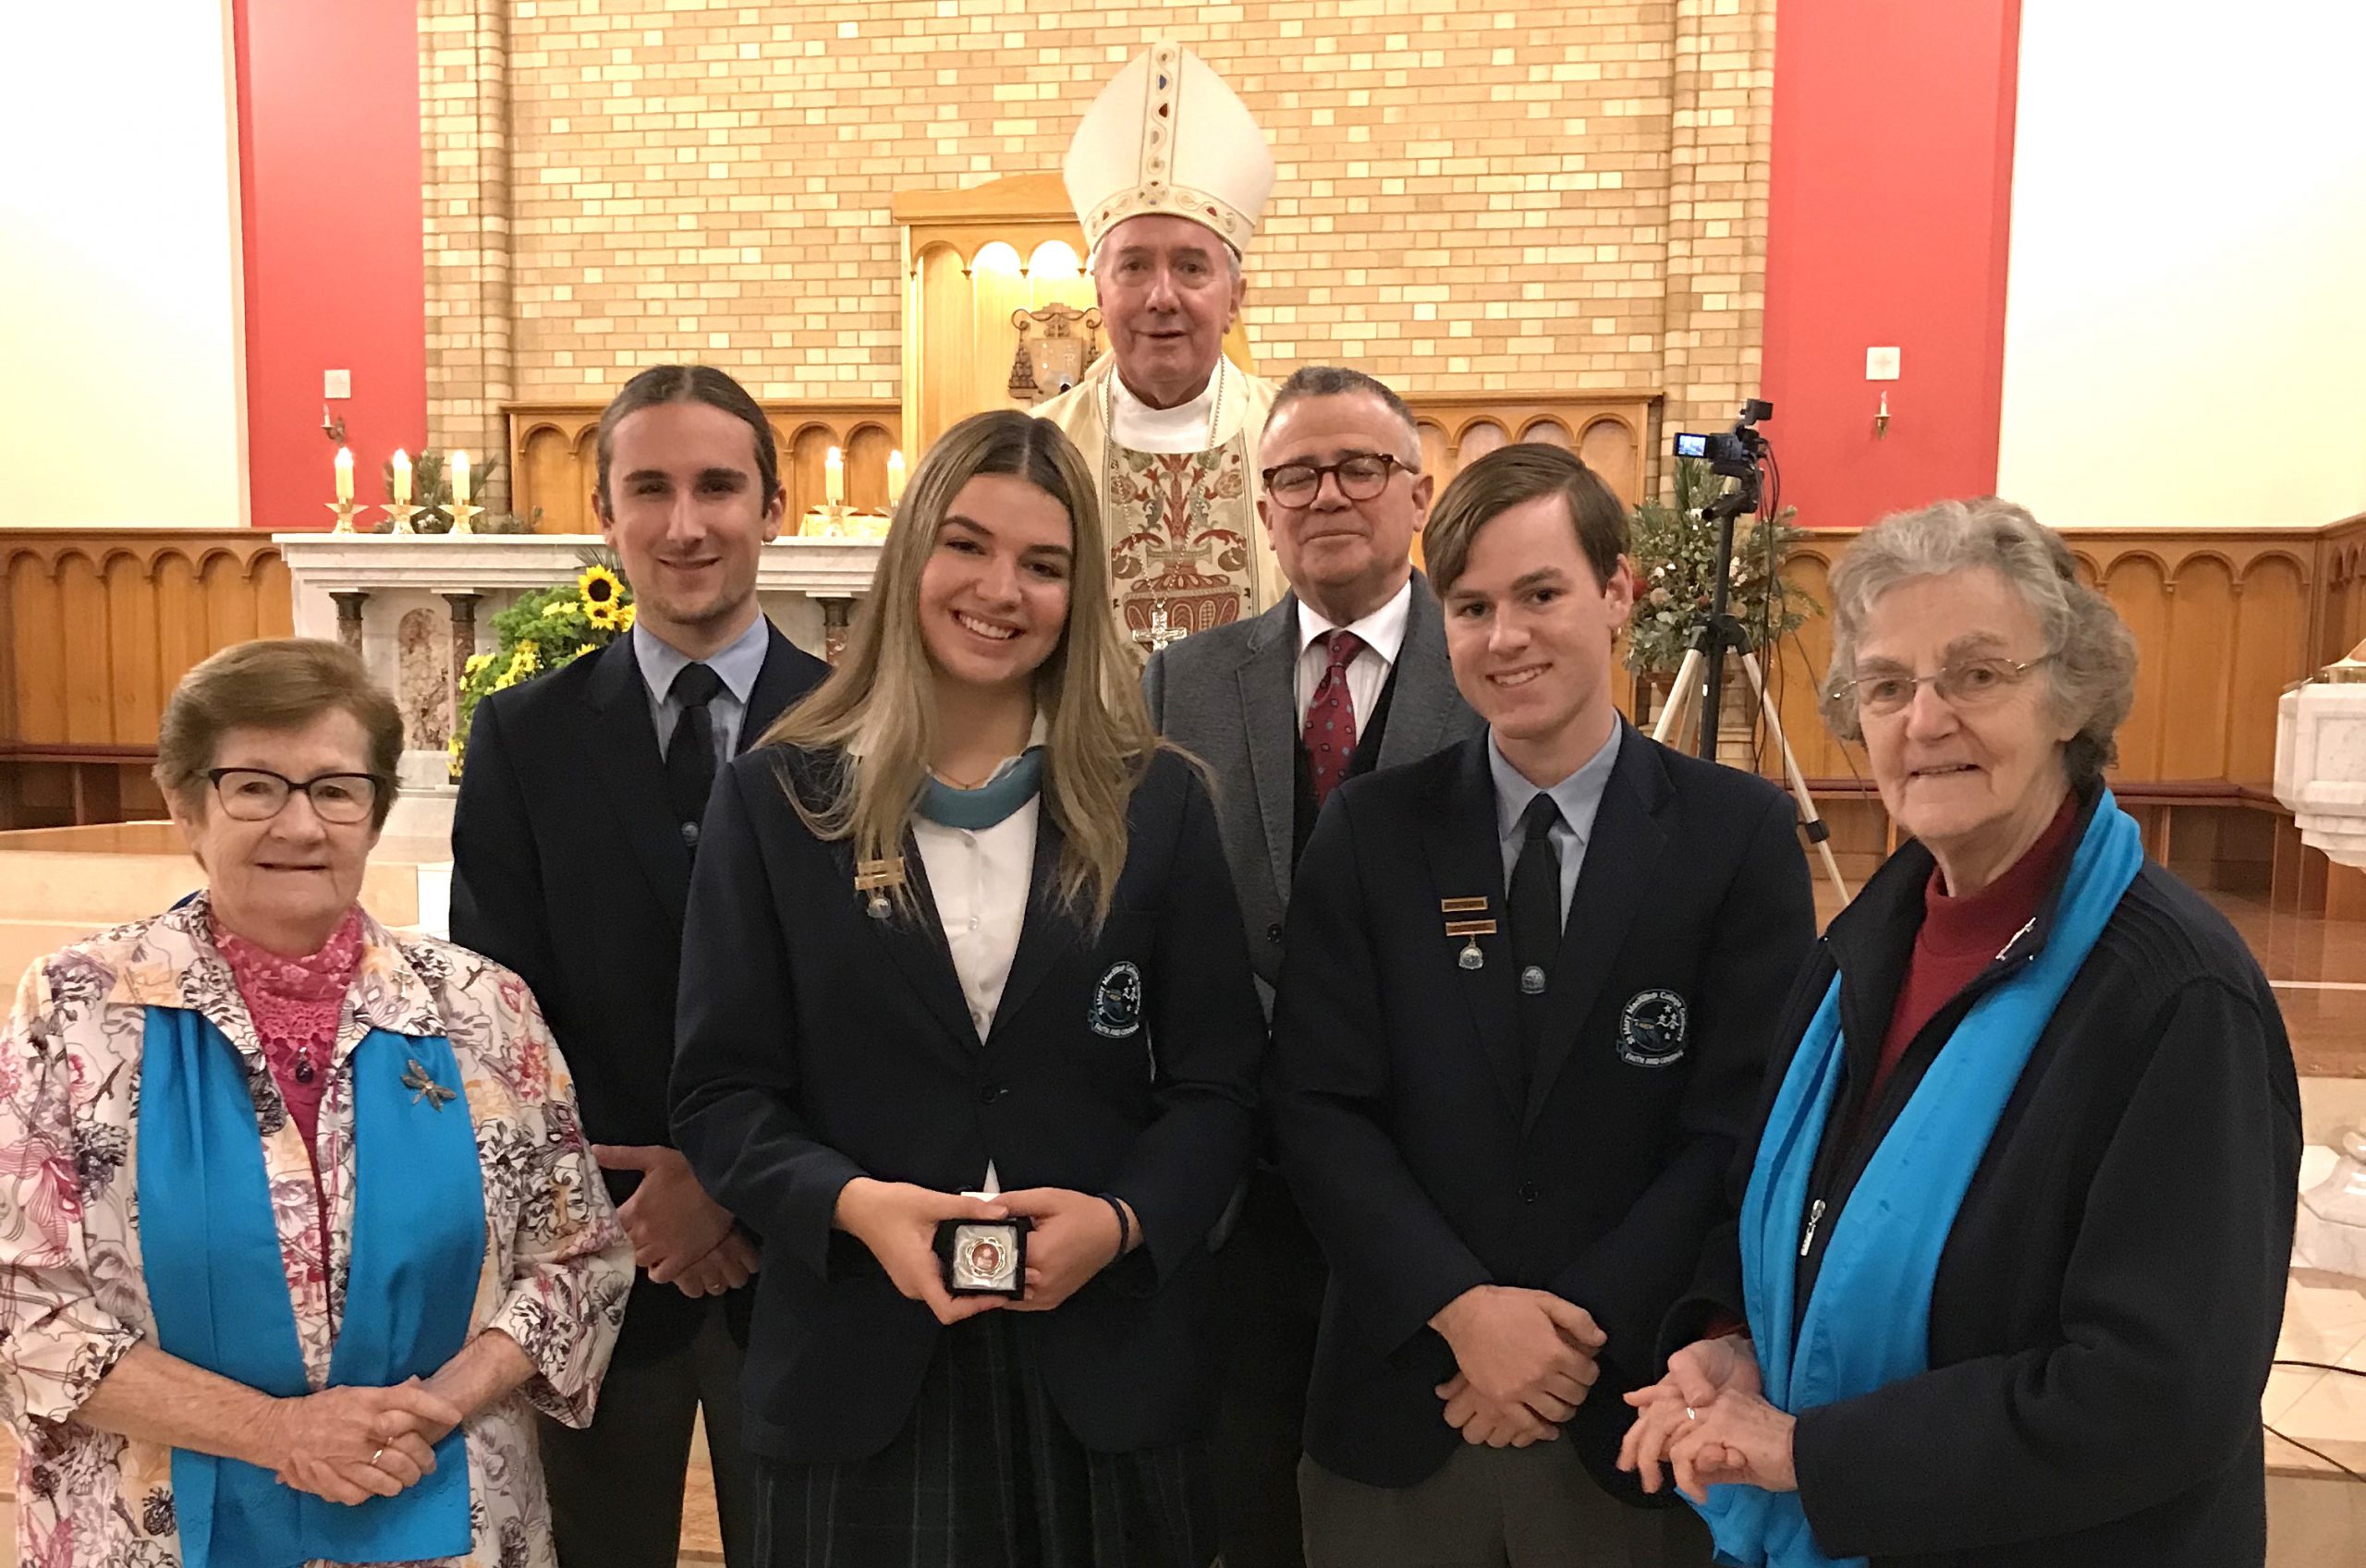 St. Mary MacKillop – “Who Do You Think You Are?” - Catholic Voice